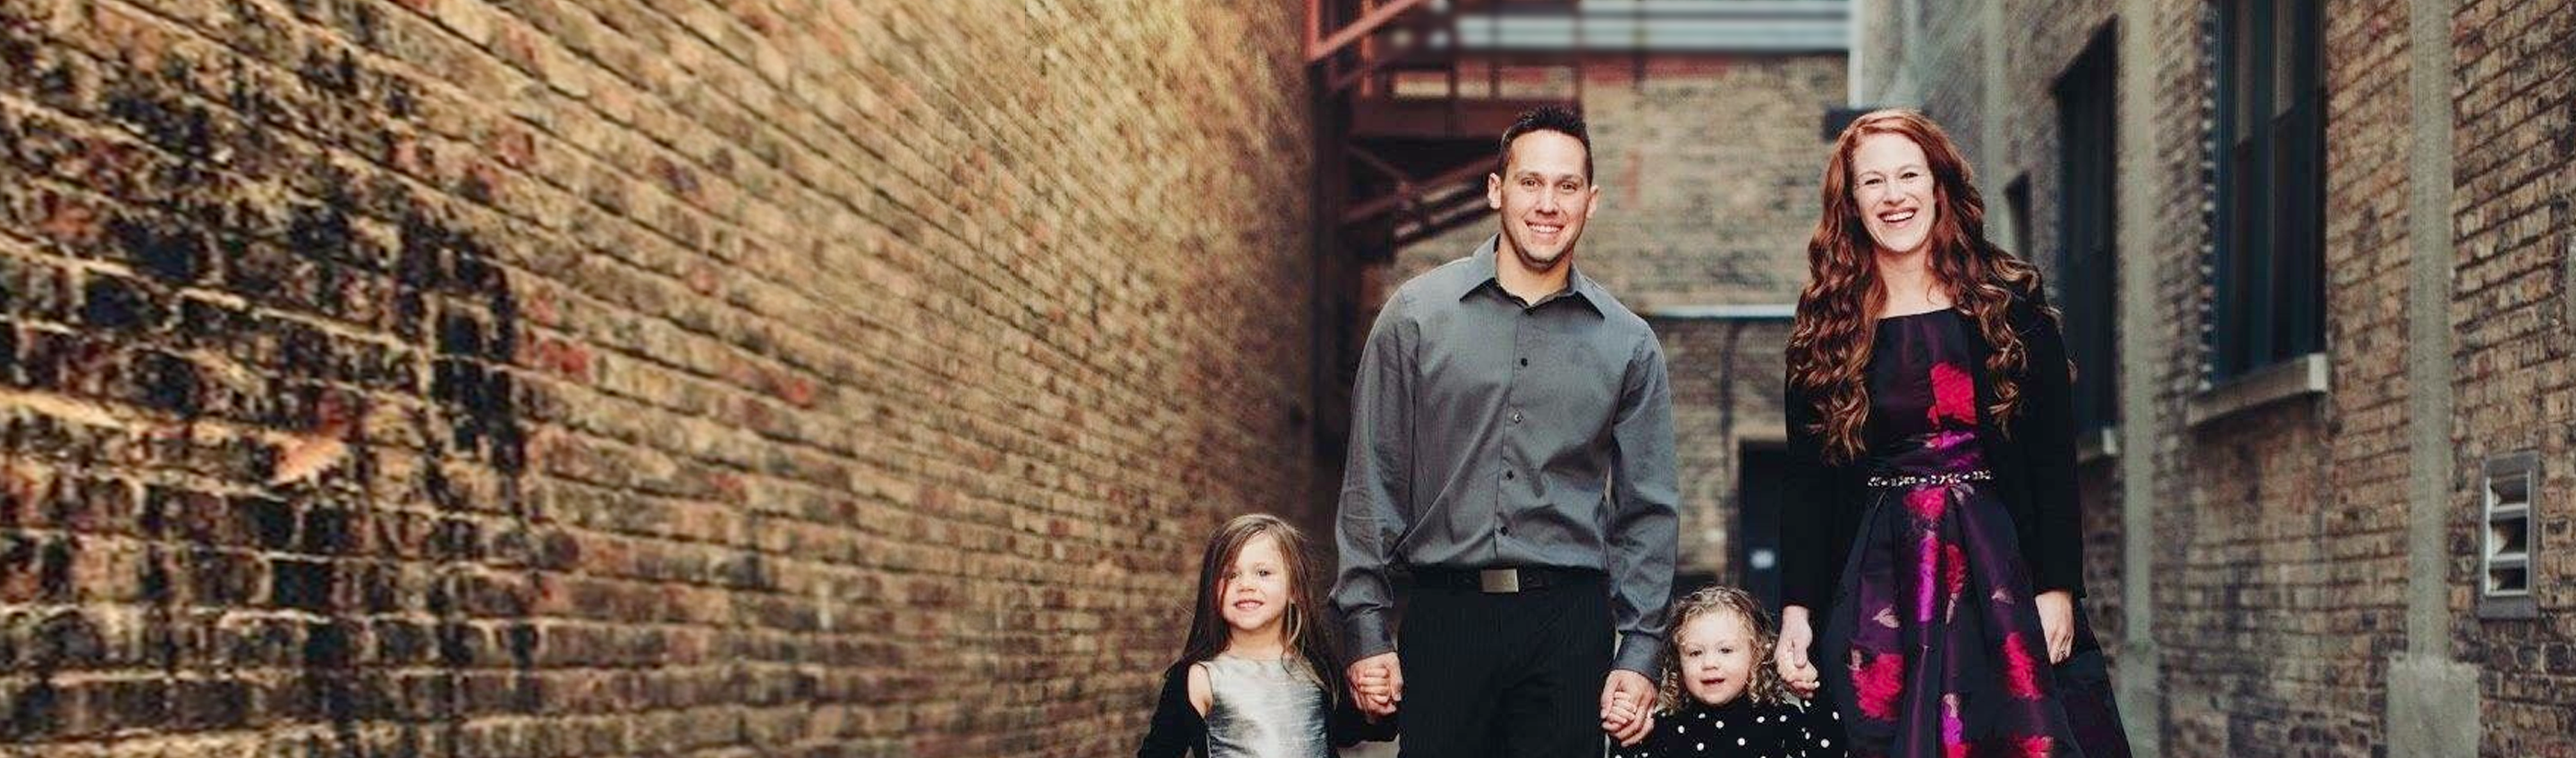 The Ledvinas, an RMHC family, posed holding hands in a picturesque brick-lined alley